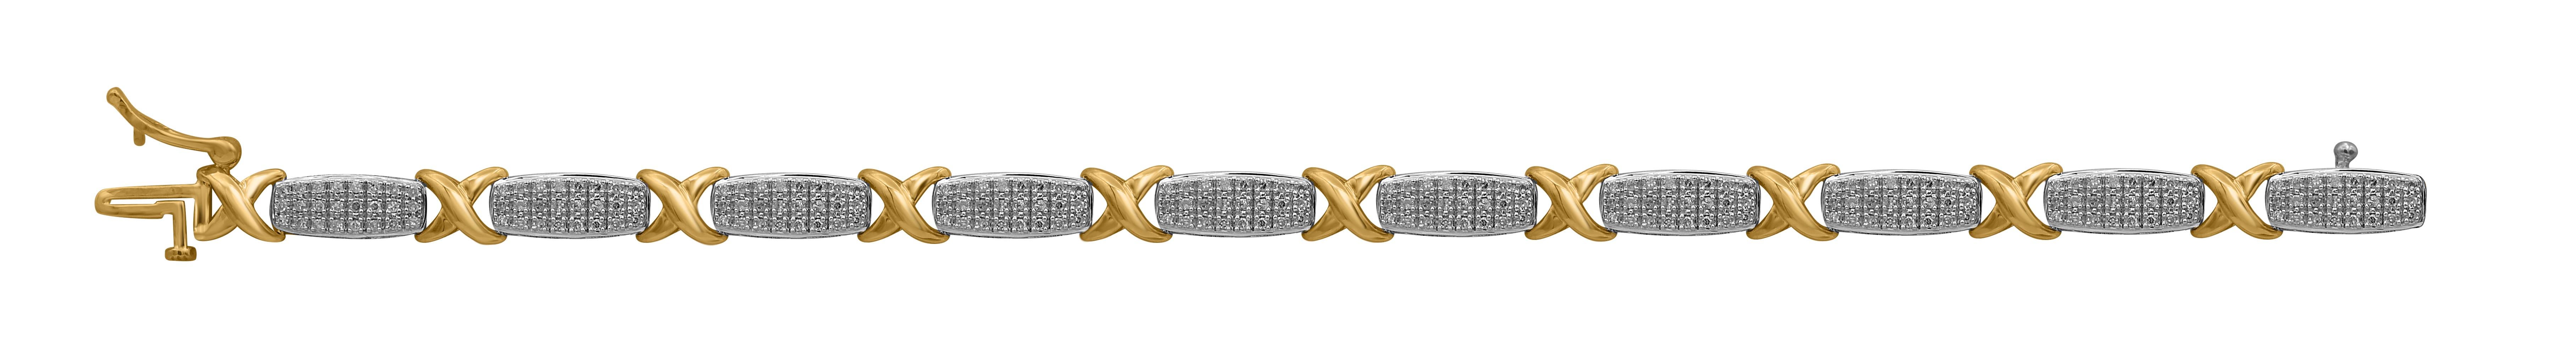 A modern take on a classic look, this diamond tennis bracelet is just your look. Featuring 240 round brilliant-cut natural diamond embellished in pave setting. The total weight of diamond is 1.00 Carat and it shine with H-I color I2 clarity
